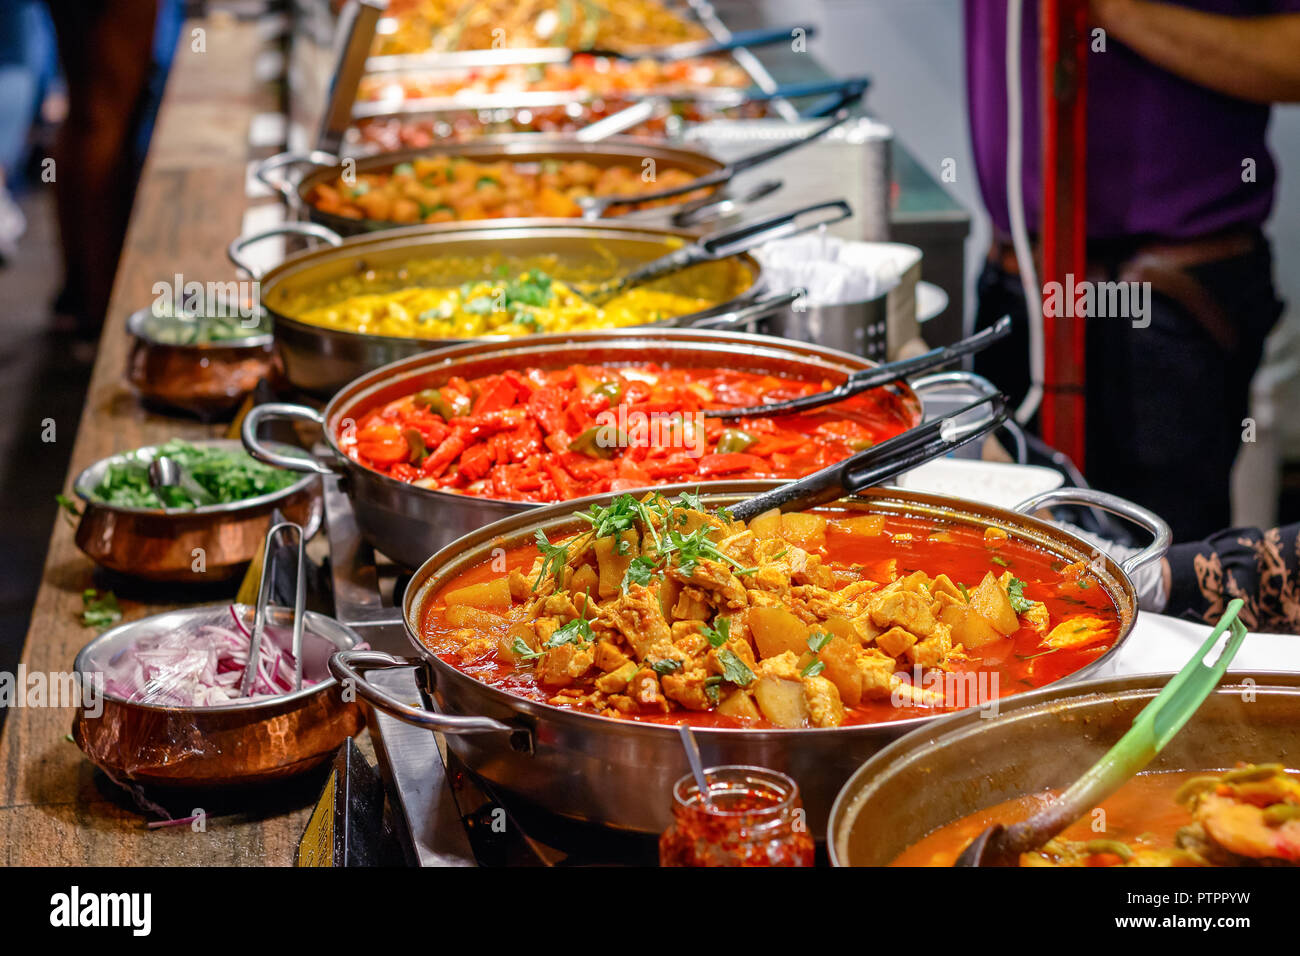 Variety of cooked curries on display at Camden Market in London Stock Photo